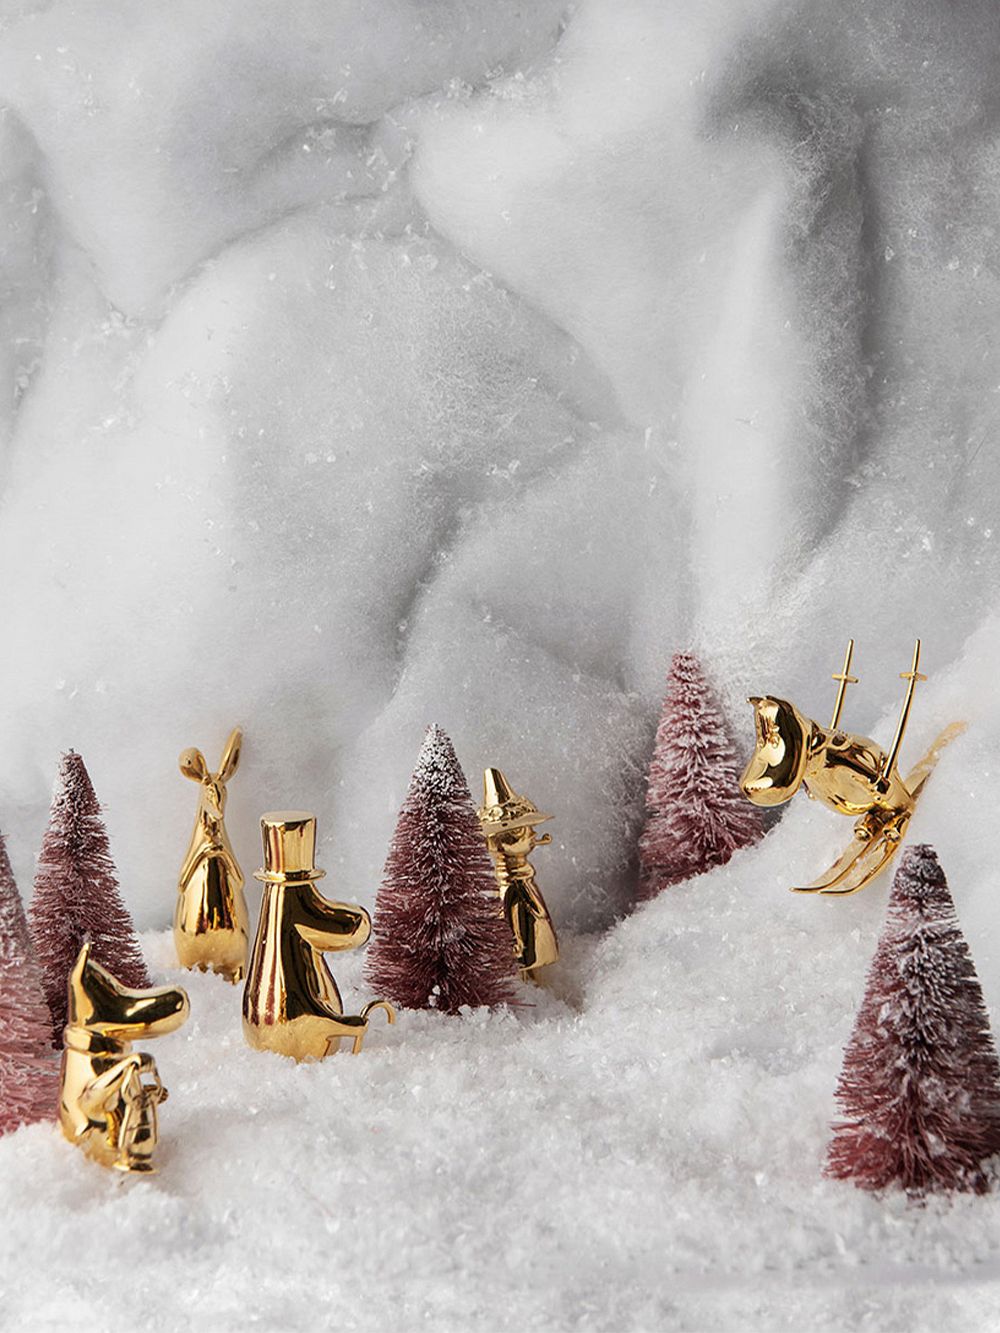 A gilded Moomintroll figurine skiing down a snowy hill with the rest of the Moomin family watching from between trees.